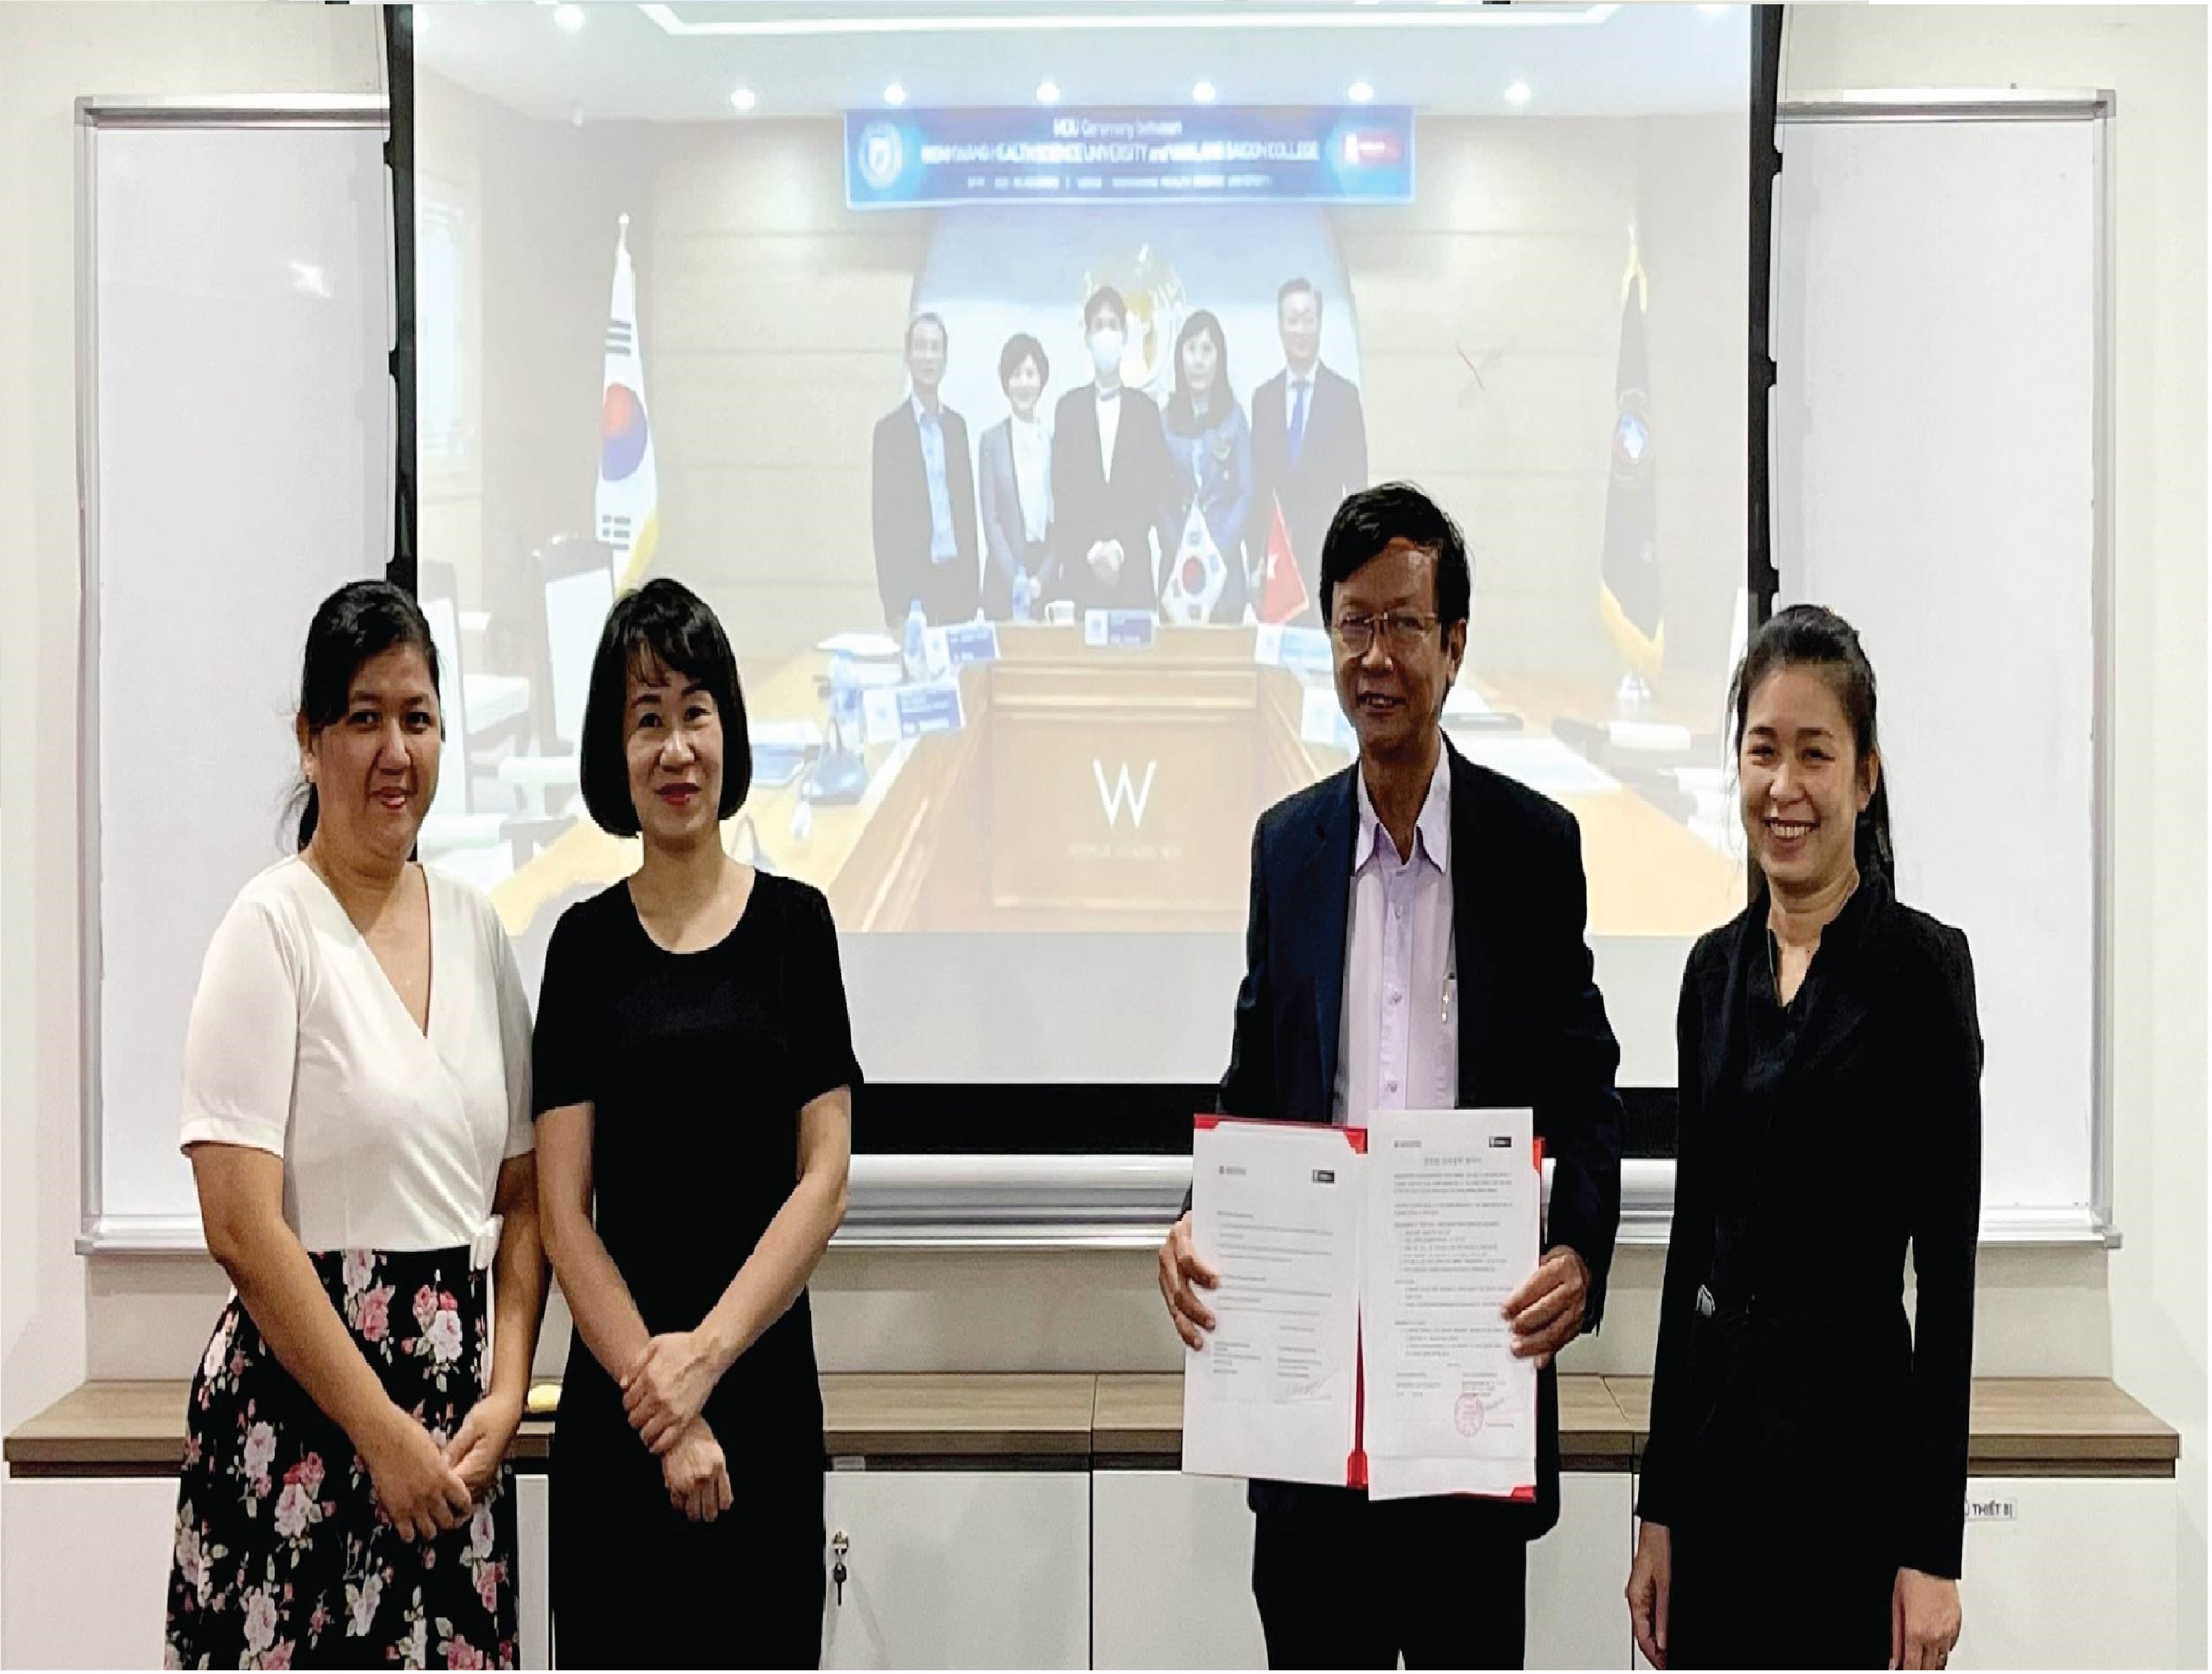 Van Lang Sai Gon College with Wonkwang Health Science University started their first partnership program